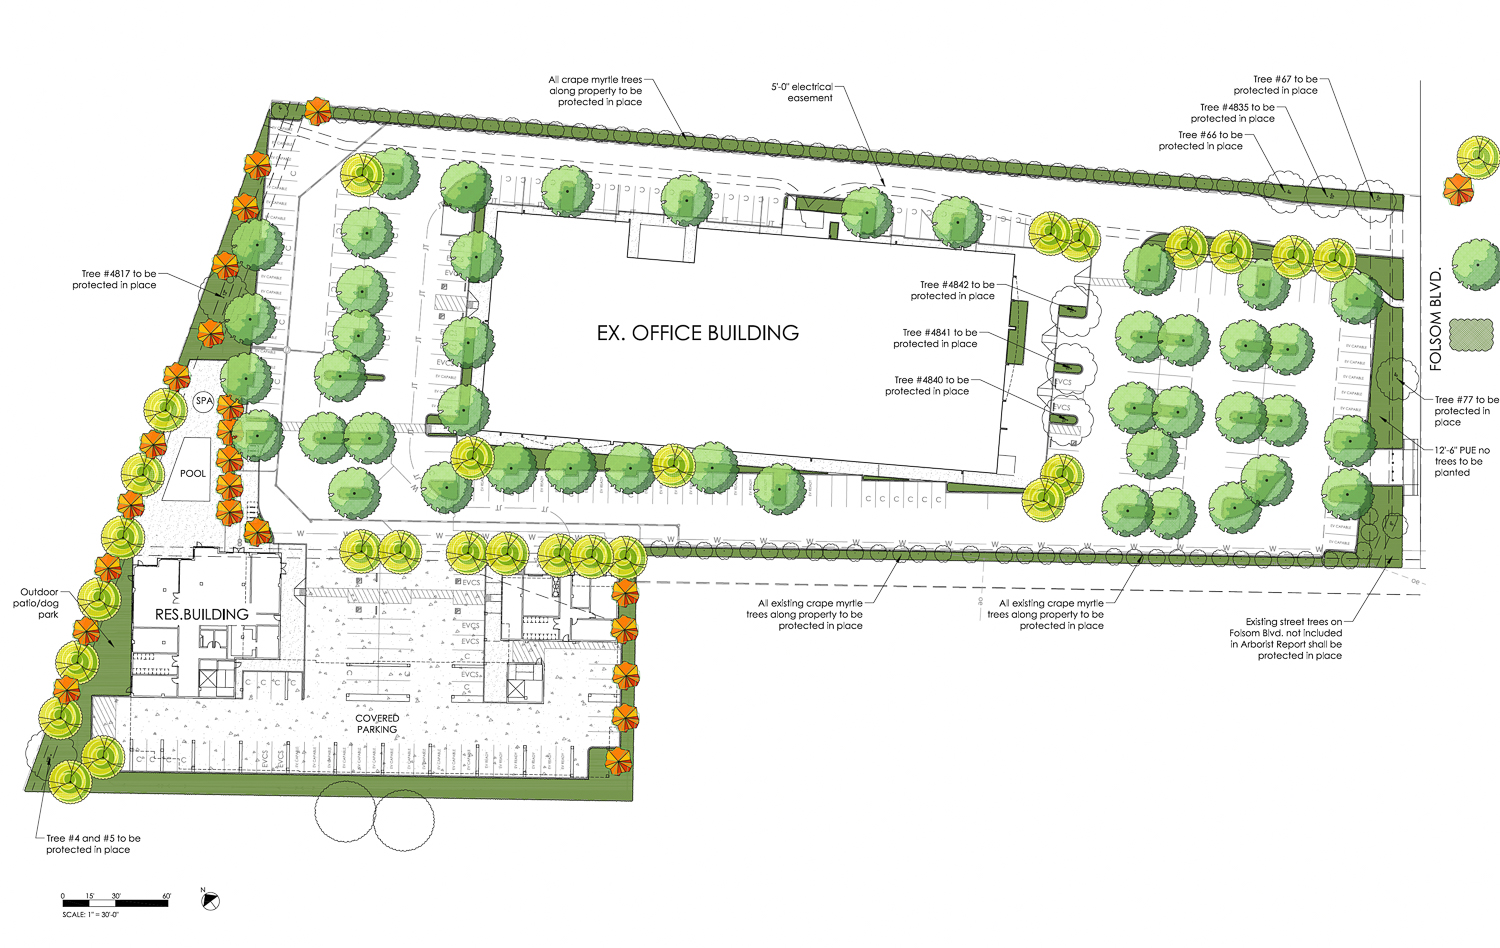 8581 Folsom Boulevard site map, illustration by NeoTeric